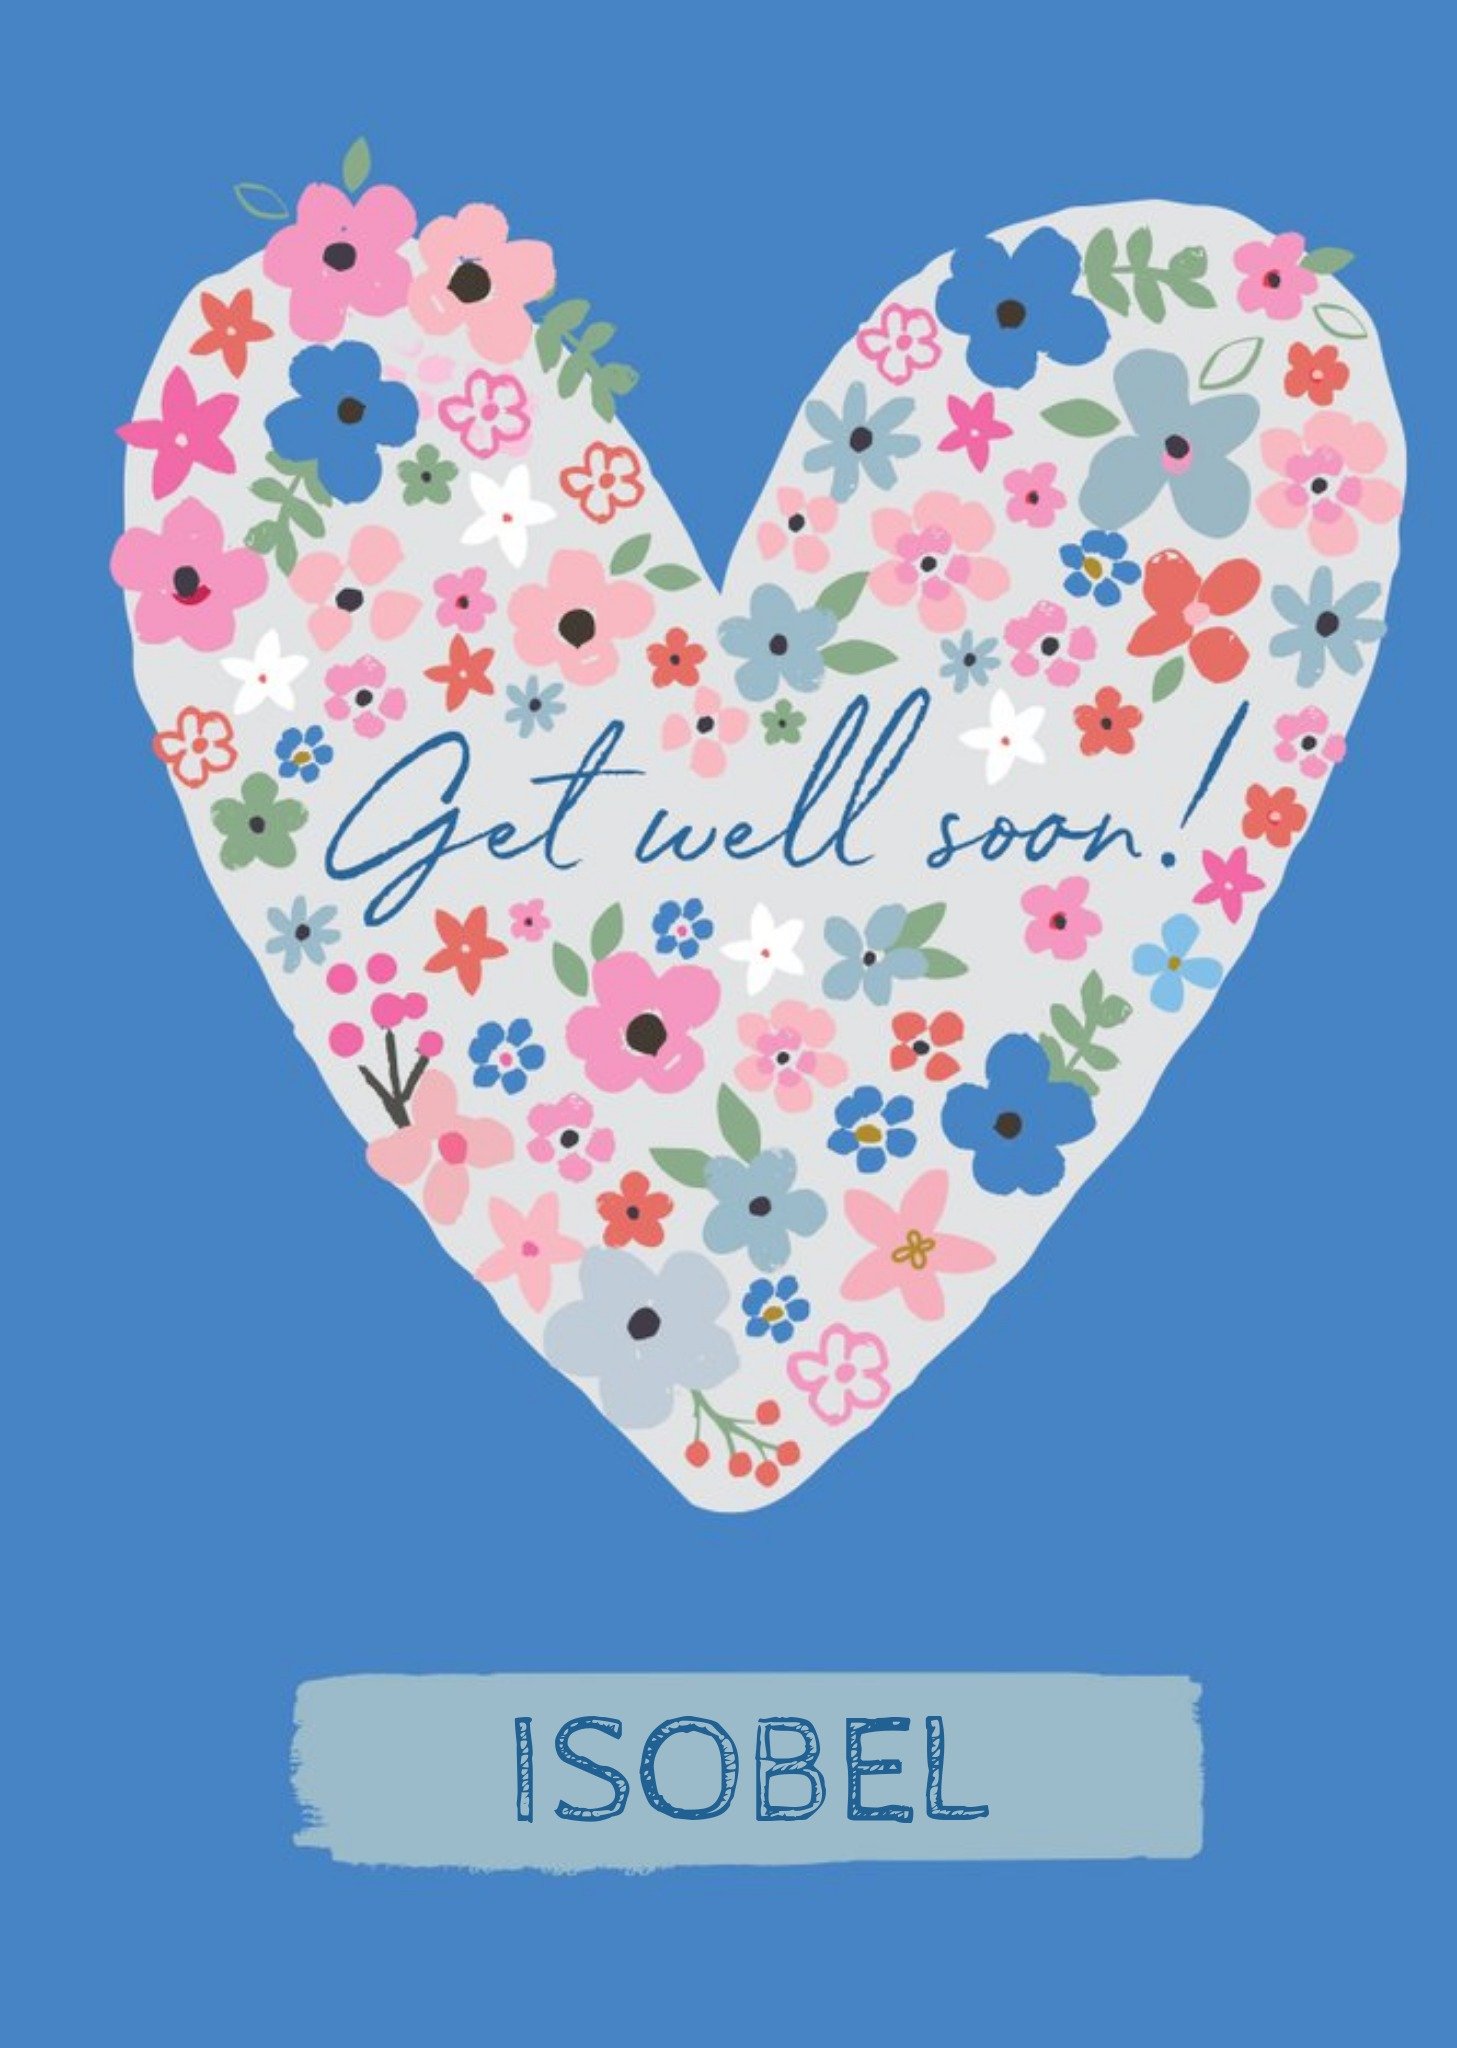 Love Hearts Natalie Alex Designs Illustrated Floral Bouquet Get Well Card Ecard